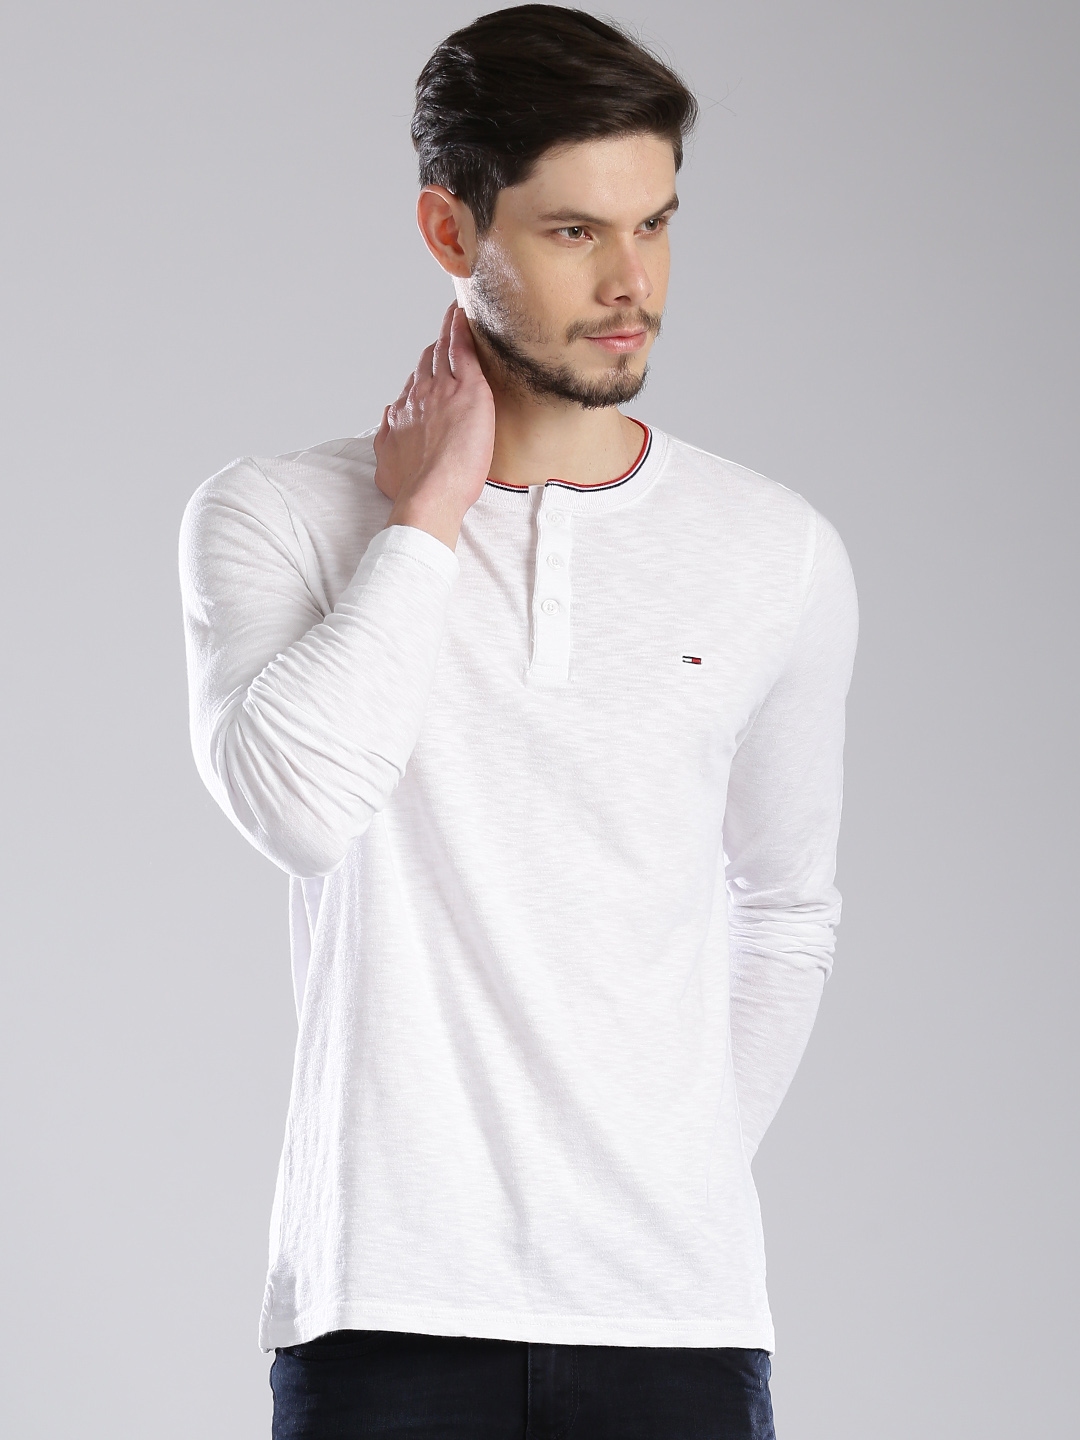 Buy Tommy Hilfiger White Henley Pure Cotton T Shirt - Tshirts for Men ...